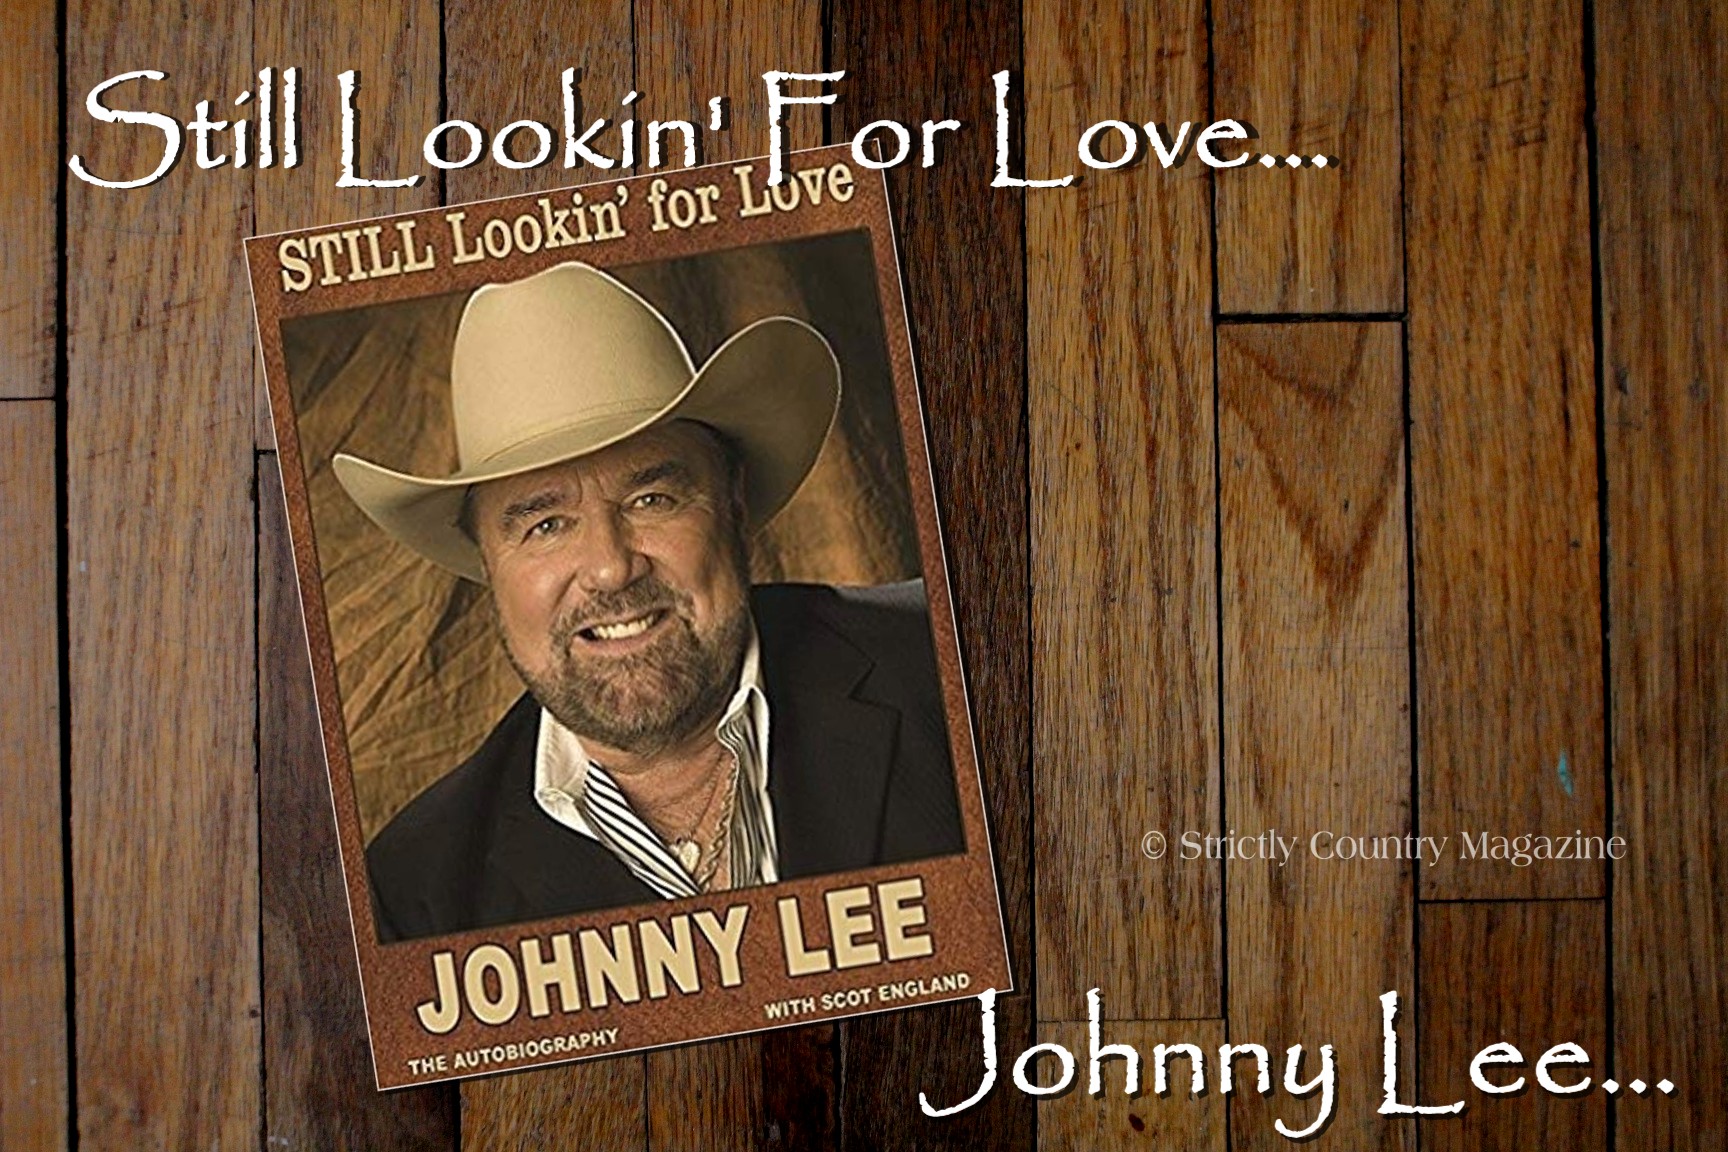 Strictly Country Magazine copyright Johnny Lee title